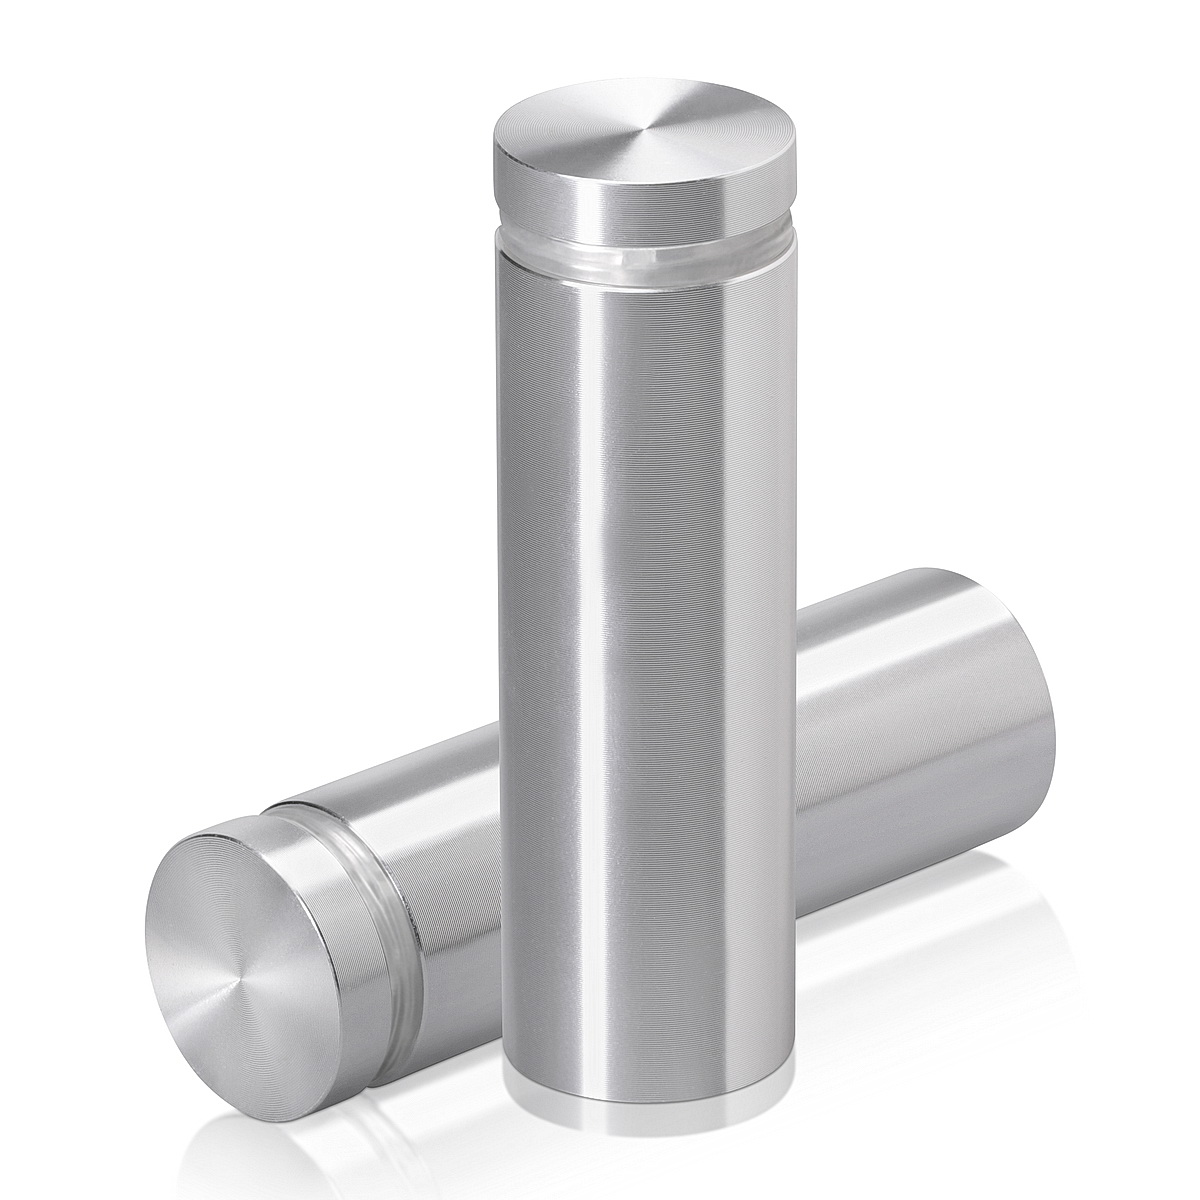 7/8'' Diameter X 2-1/2'' Barrel Length, Aluminum Flat Head Standoffs, Shiny Anodized Finish Easy Fasten Standoff (For Inside / Outside use) Tamper Proof Standoff [Required Material Hole Size: 7/16'']